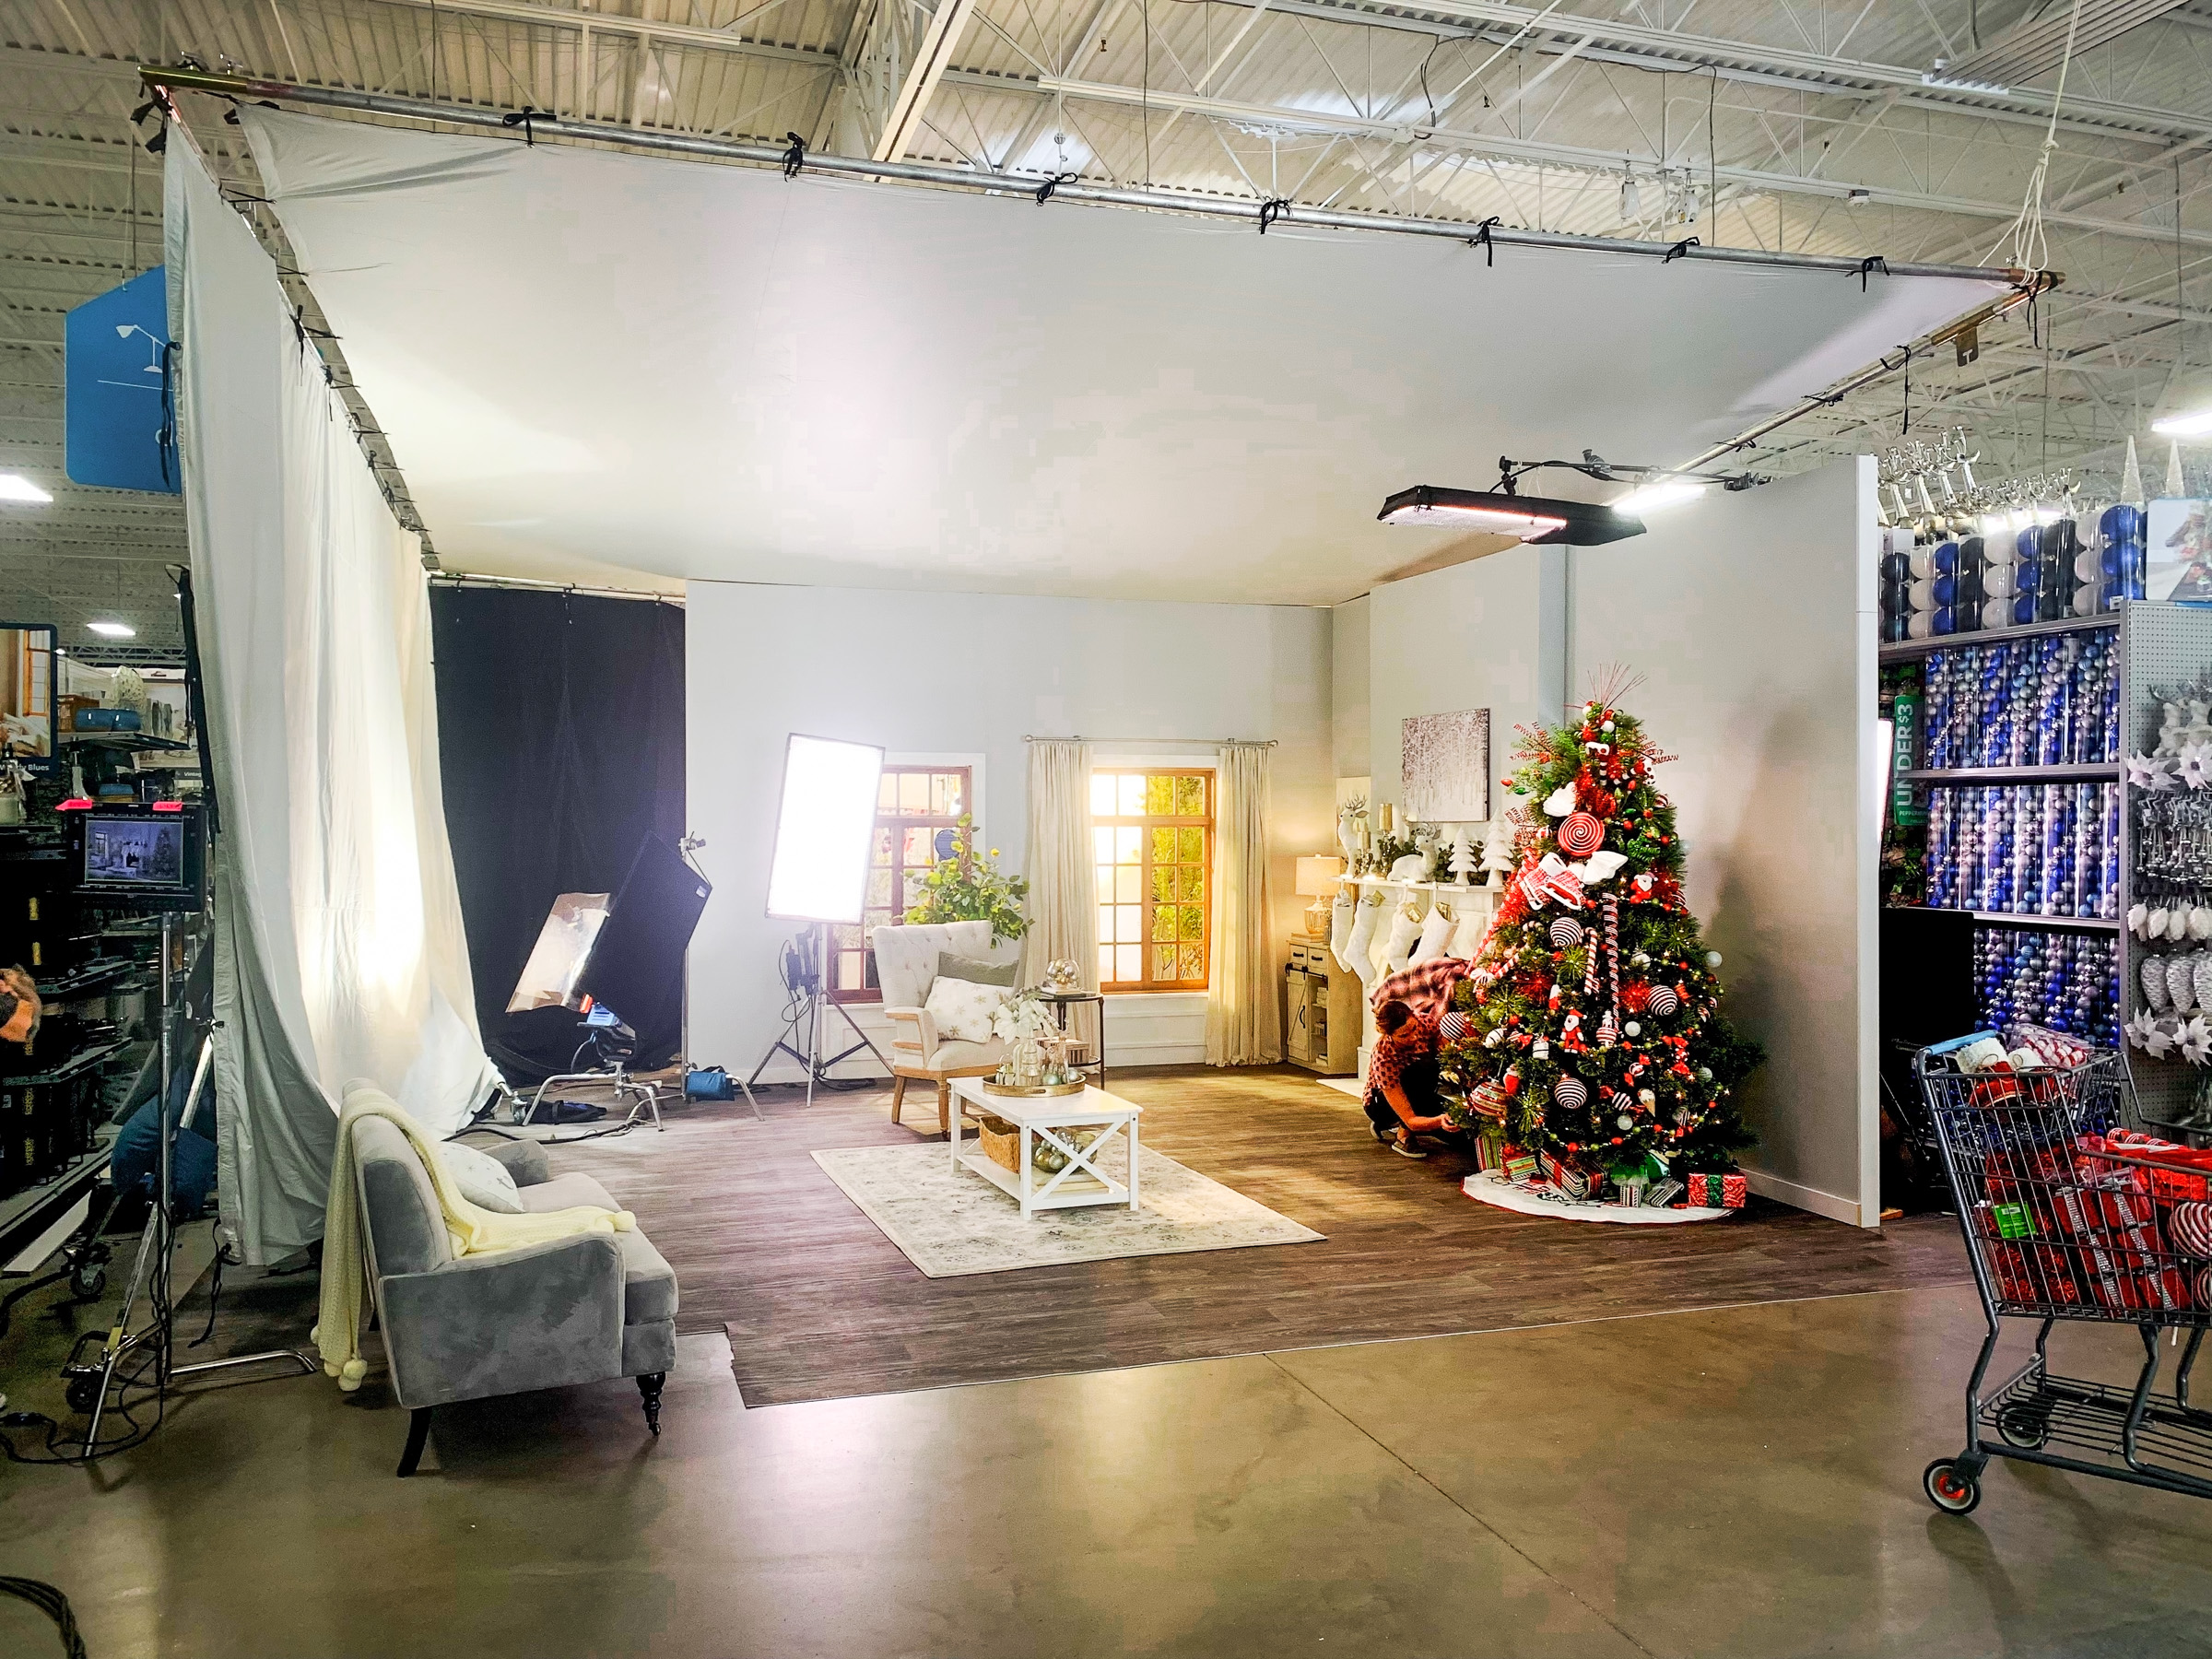 Stephen-Austin-Welch-director-photographer-behind-the-scenes-bts-At_Home-christamas_perfect_one-b-t-s-06